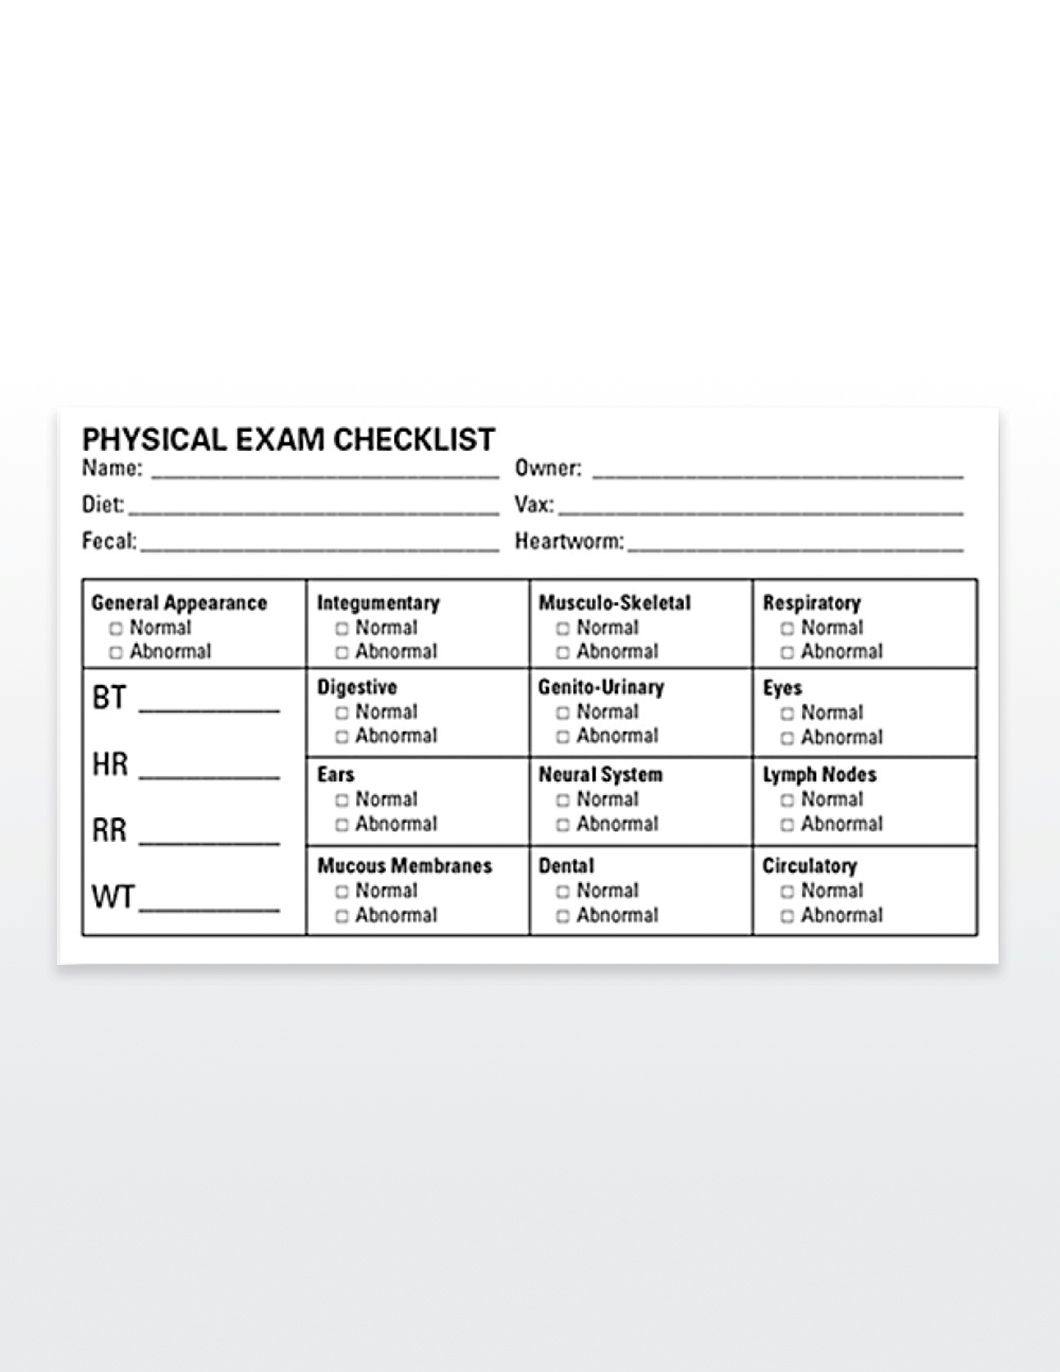 medical-record-labels-physical-exam-checklist